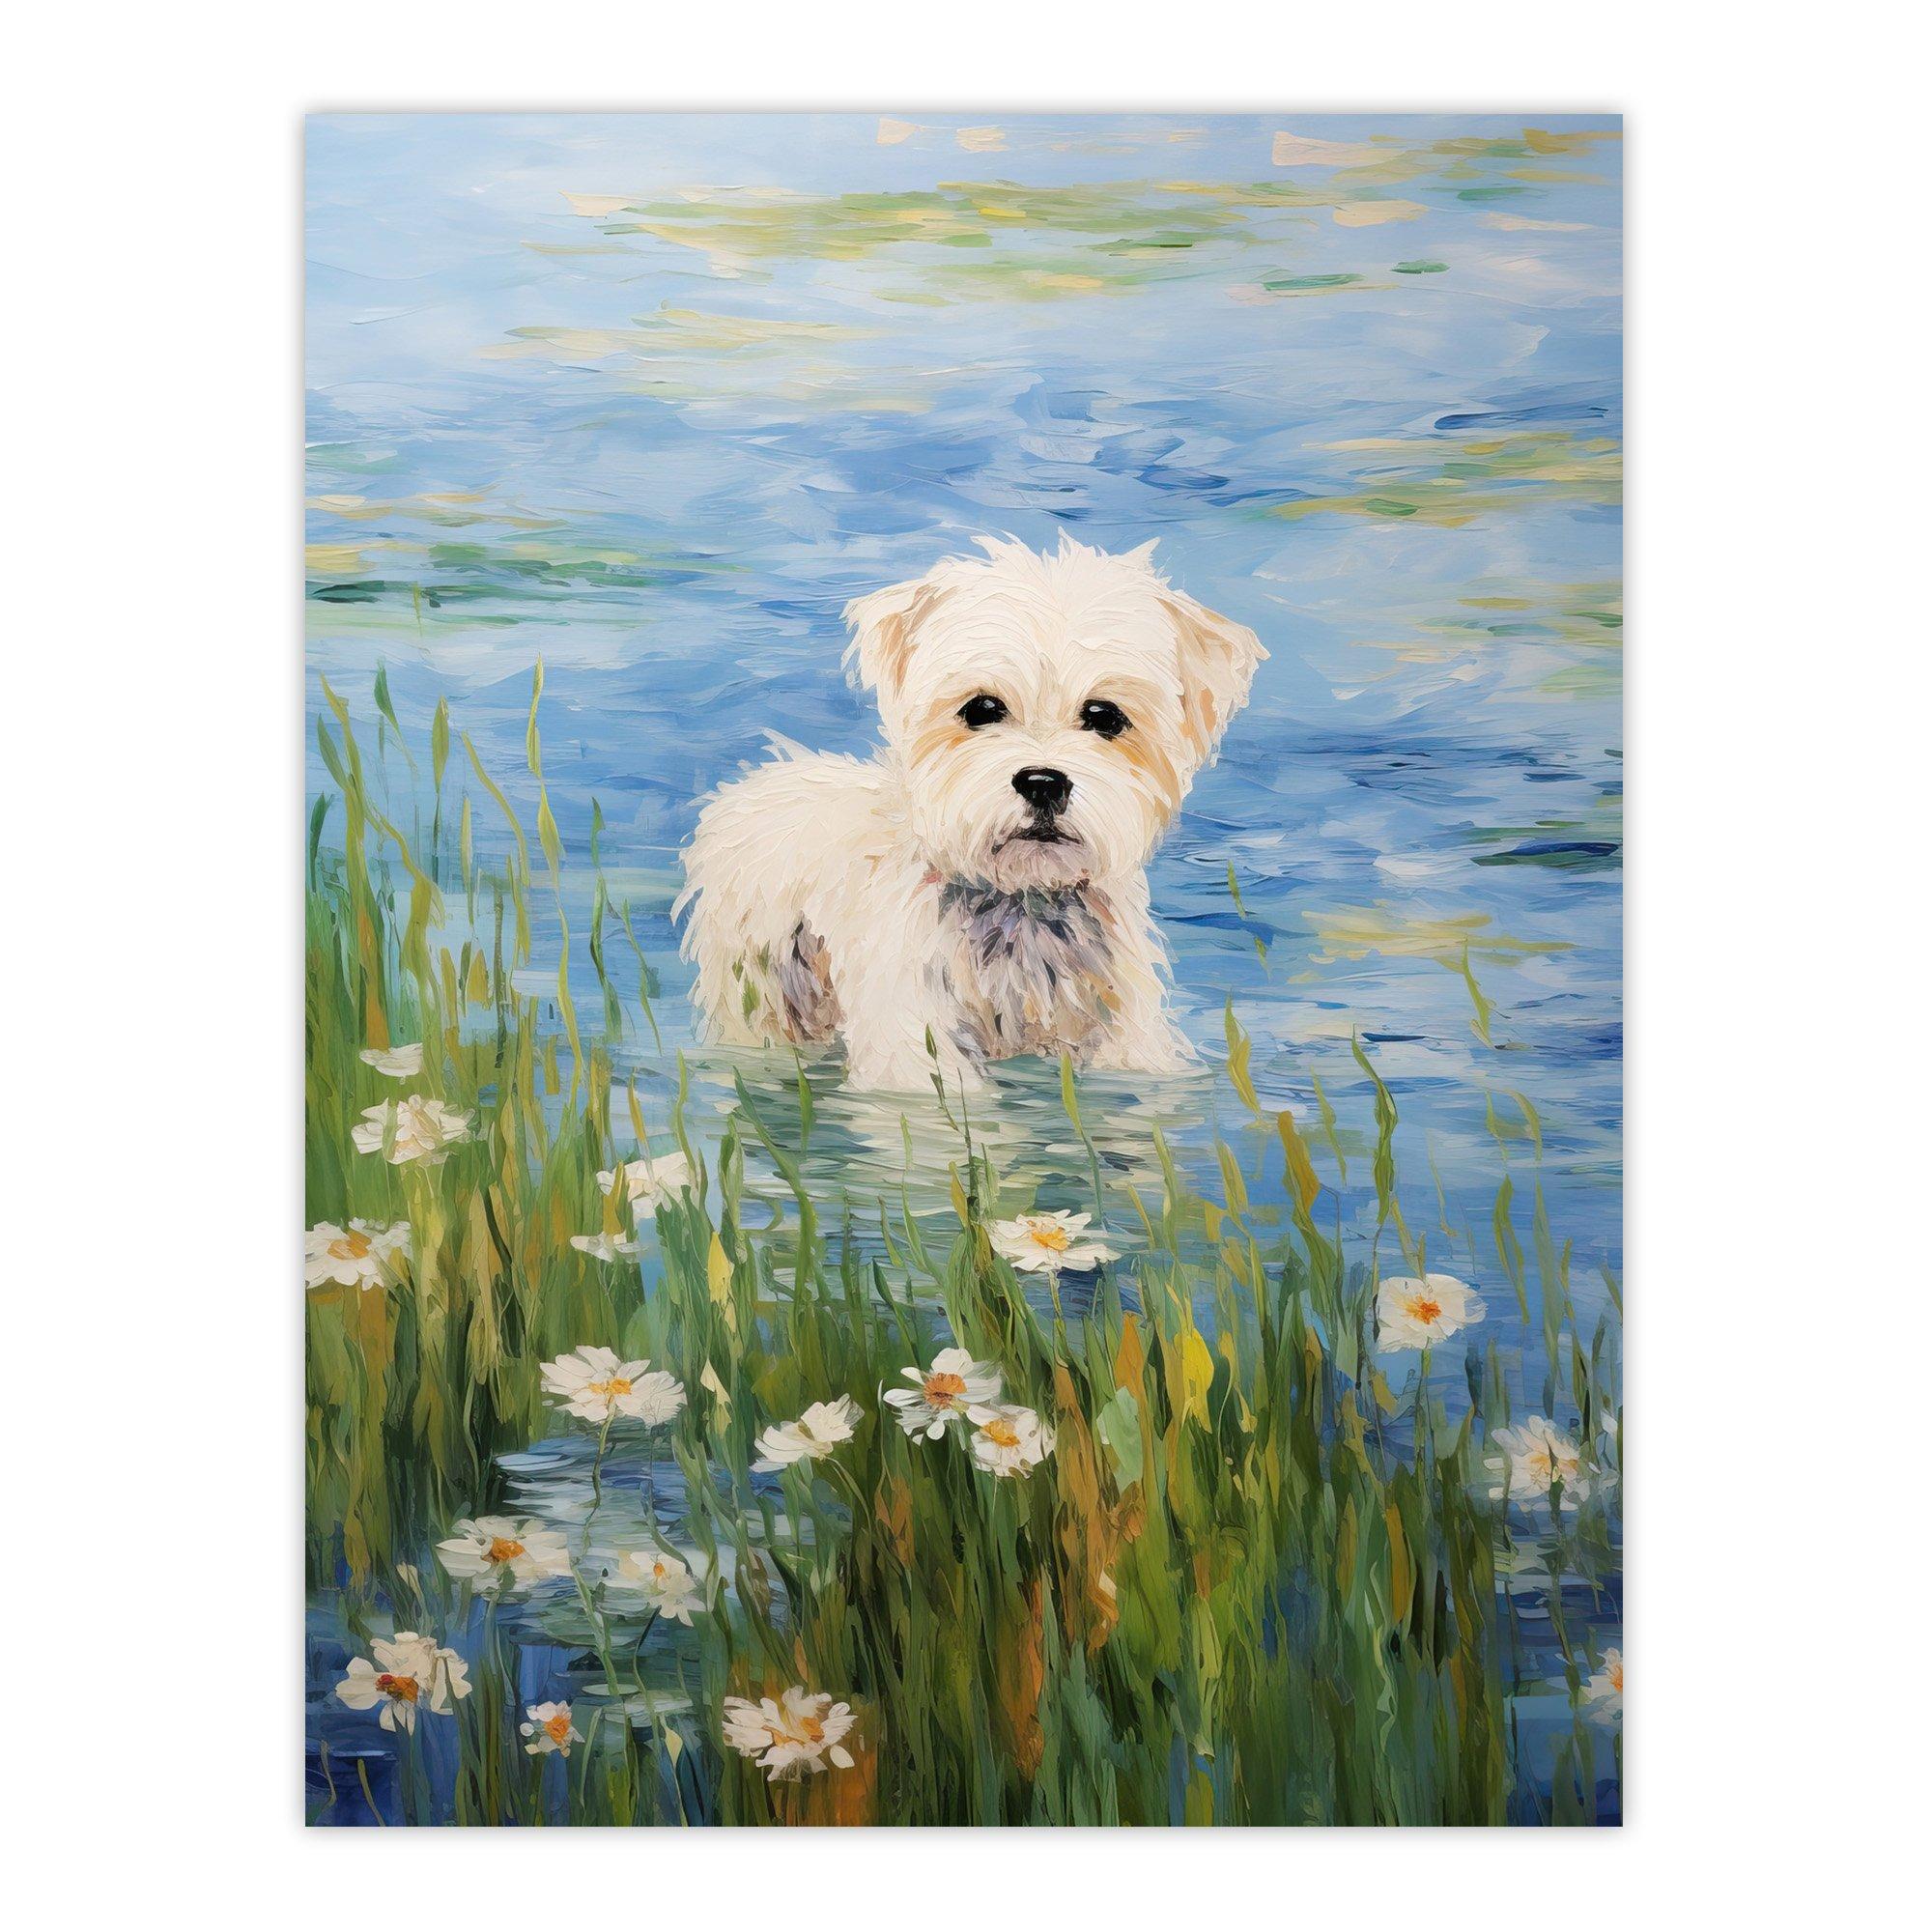 maltese dog claude monet style oil painting portrait in lake by wildflowers large wall unframed art poster print thick paper 18x24 inch